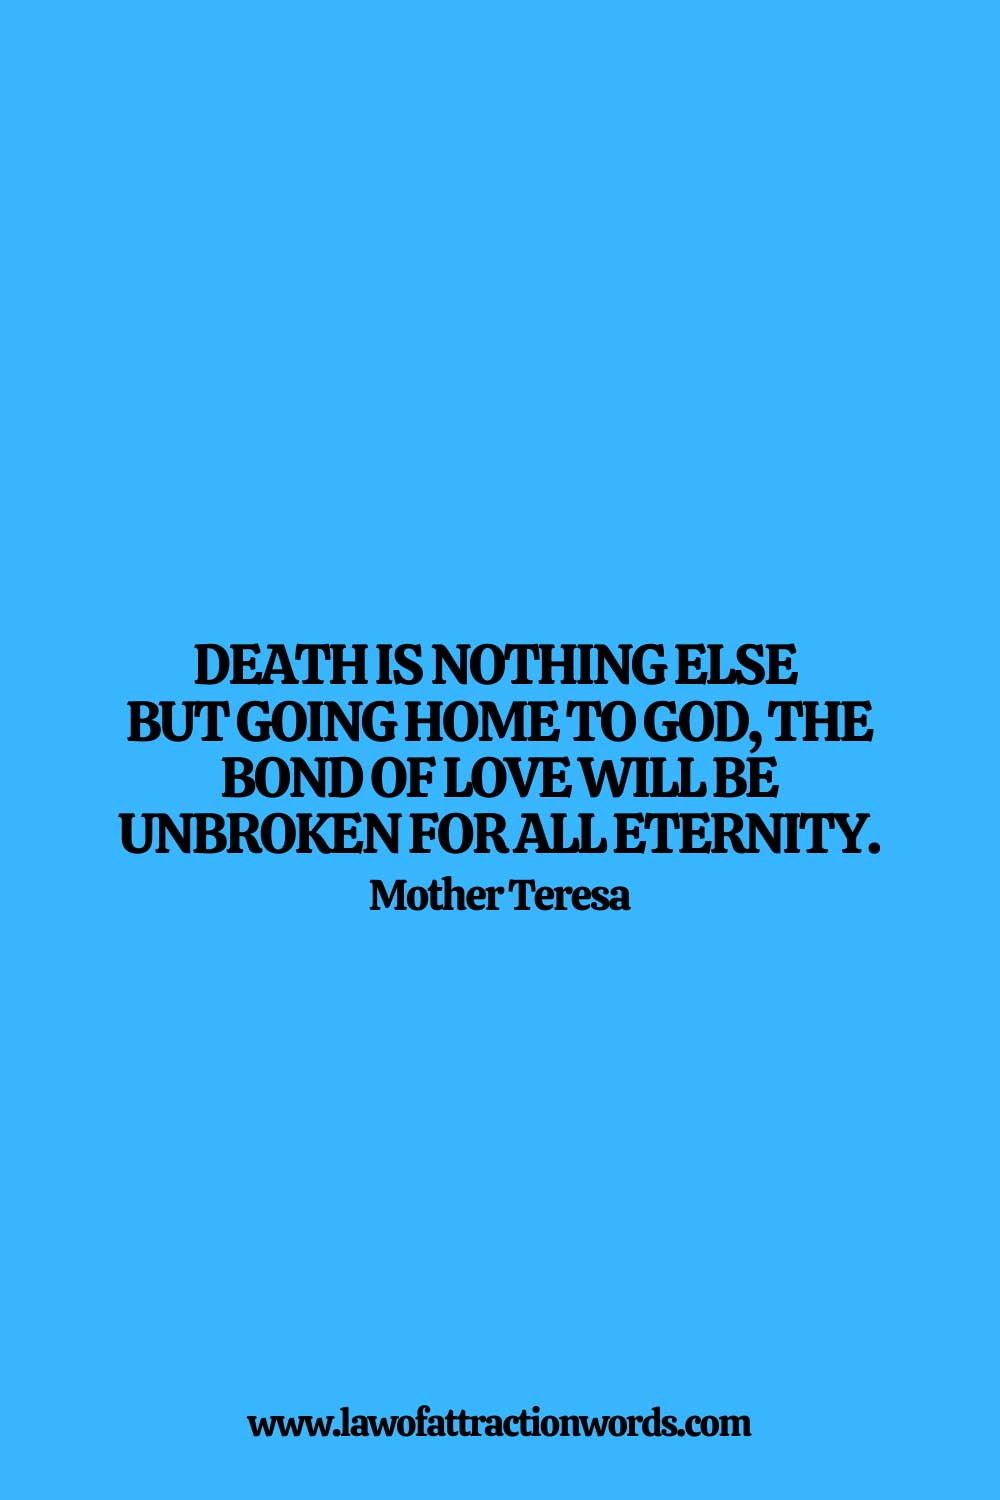 Famous Spiritual Quotes For Death Of A Loved One